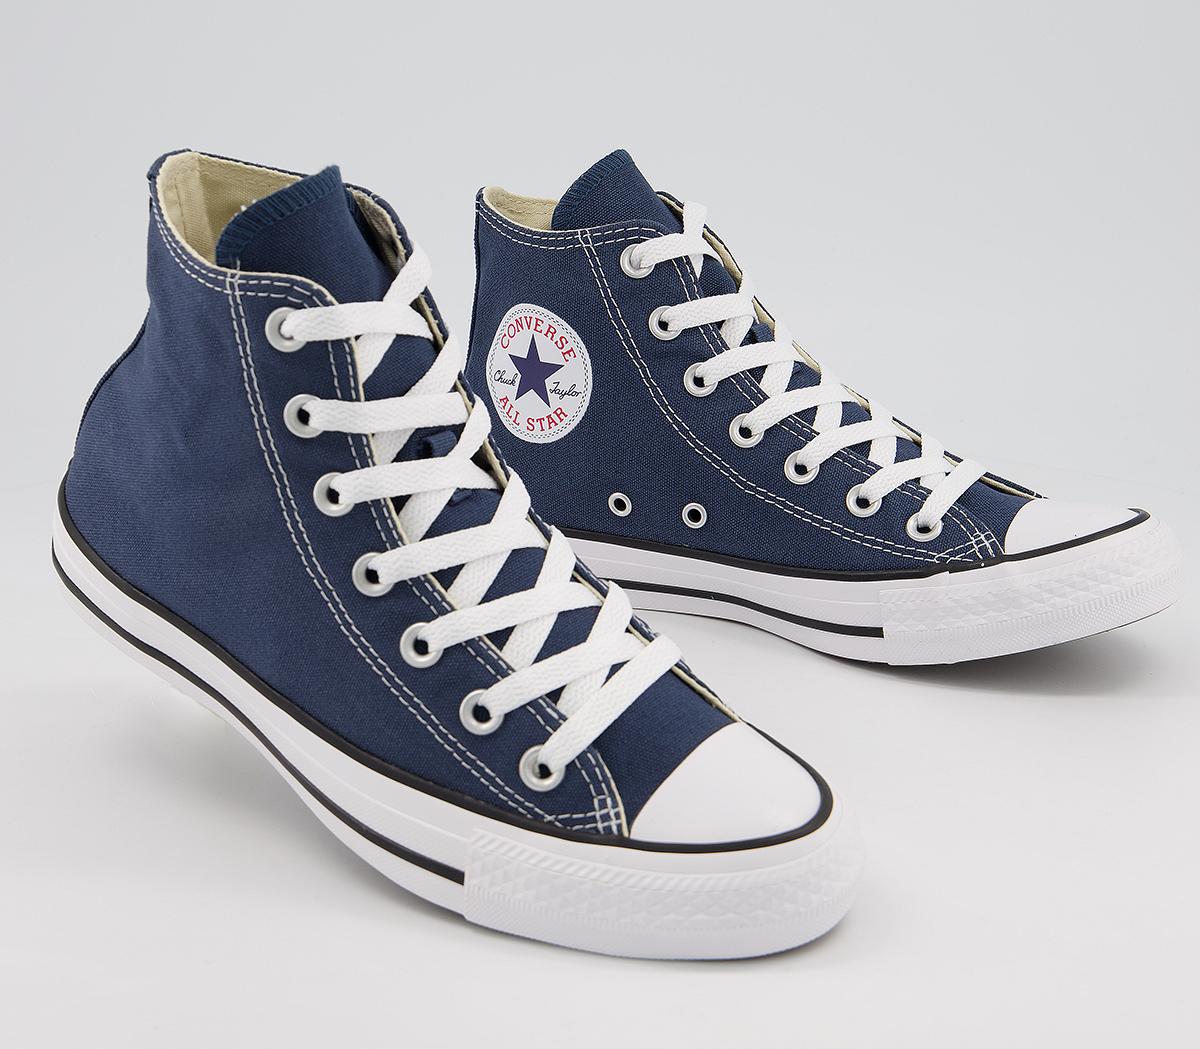 Converse All Star Hi Trainers Navy Canvas - Unisex Sports